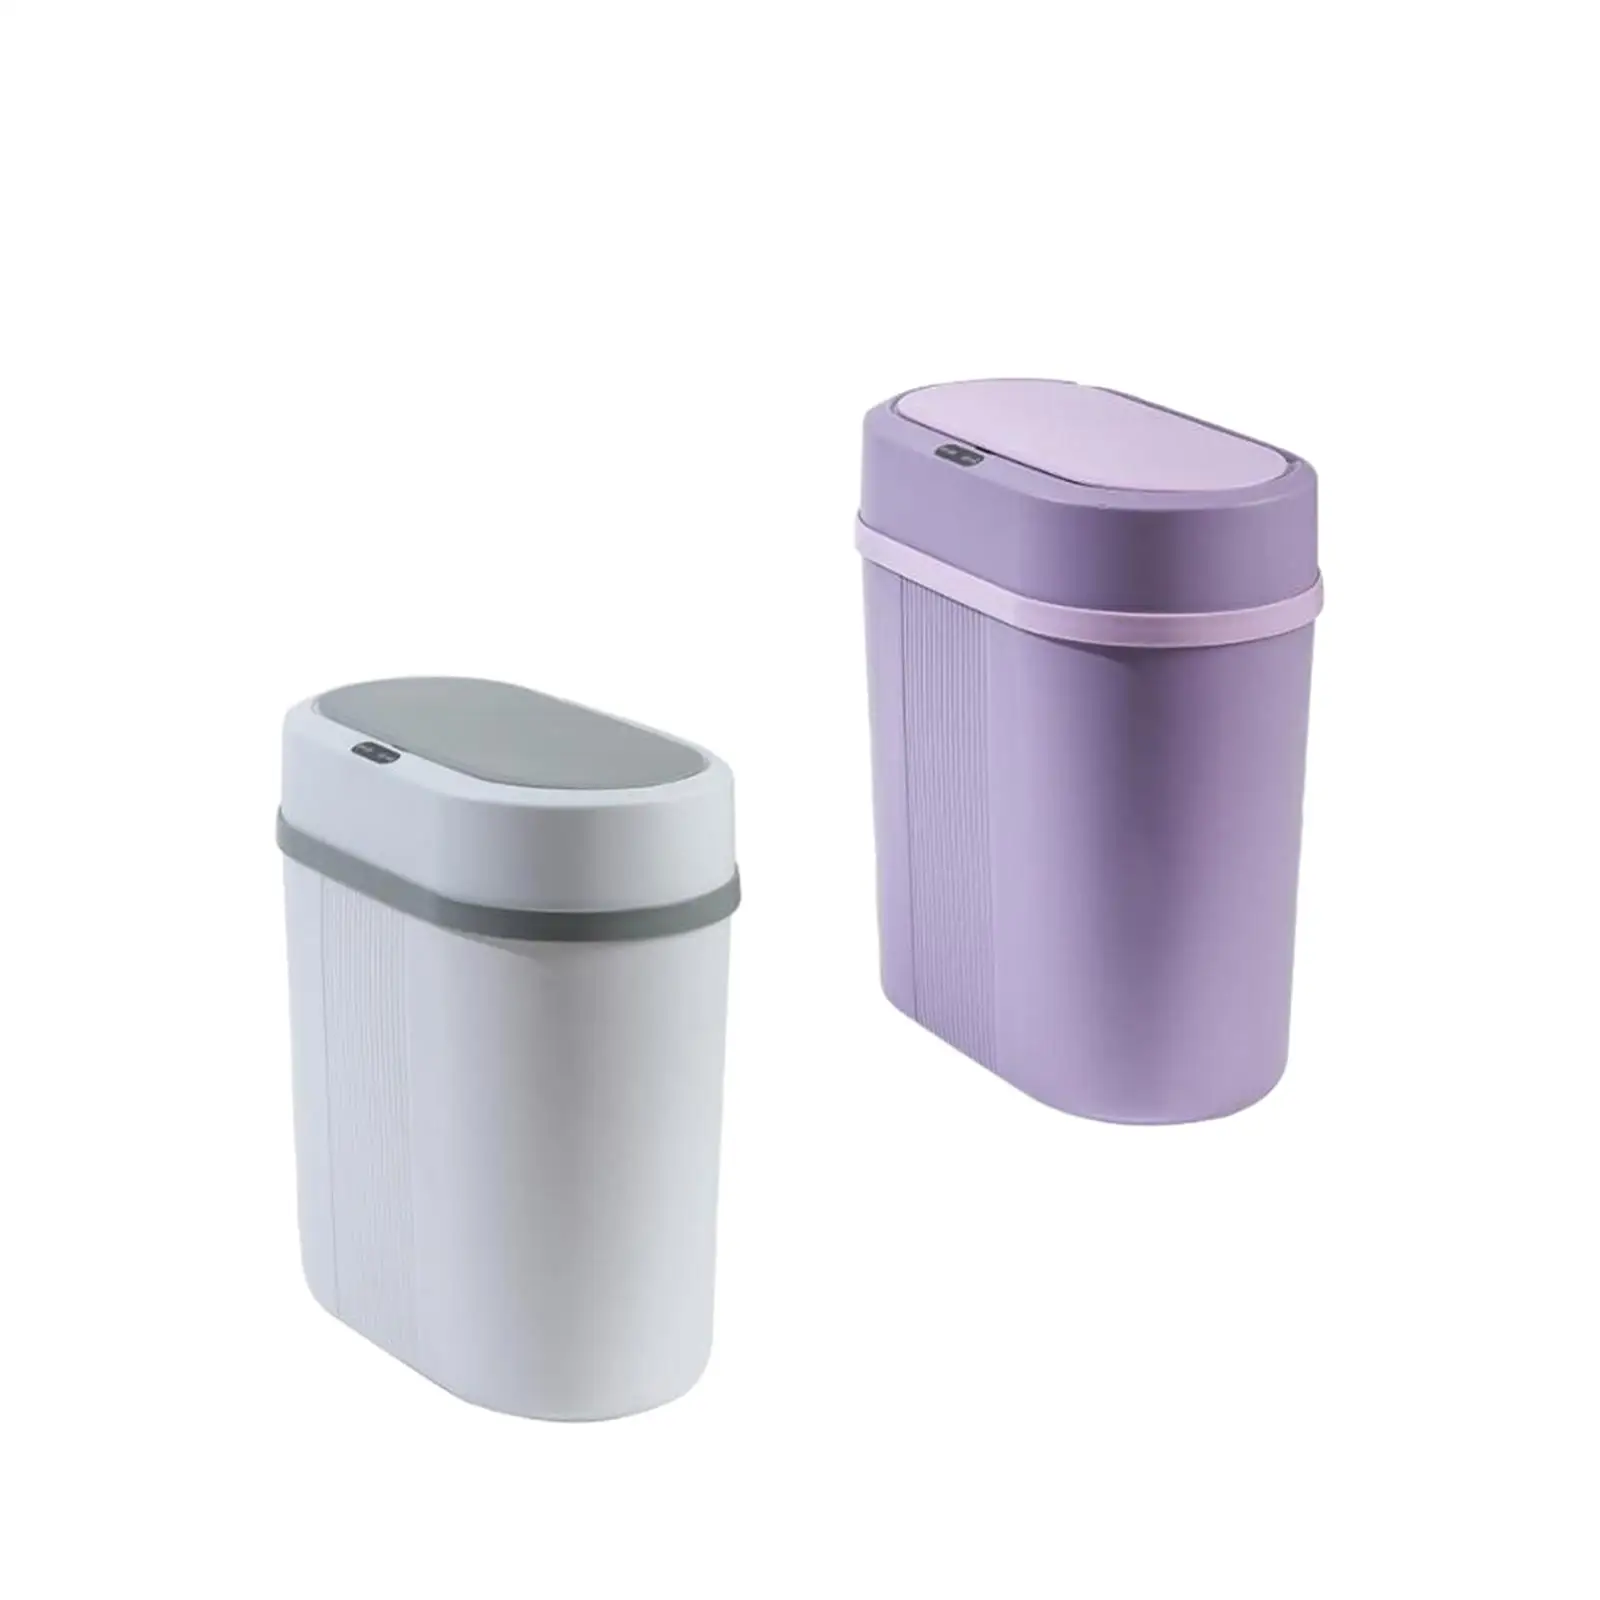 Smart Touchless Garbage Bin 12 Liter Trash Can Compact for Office Washroom